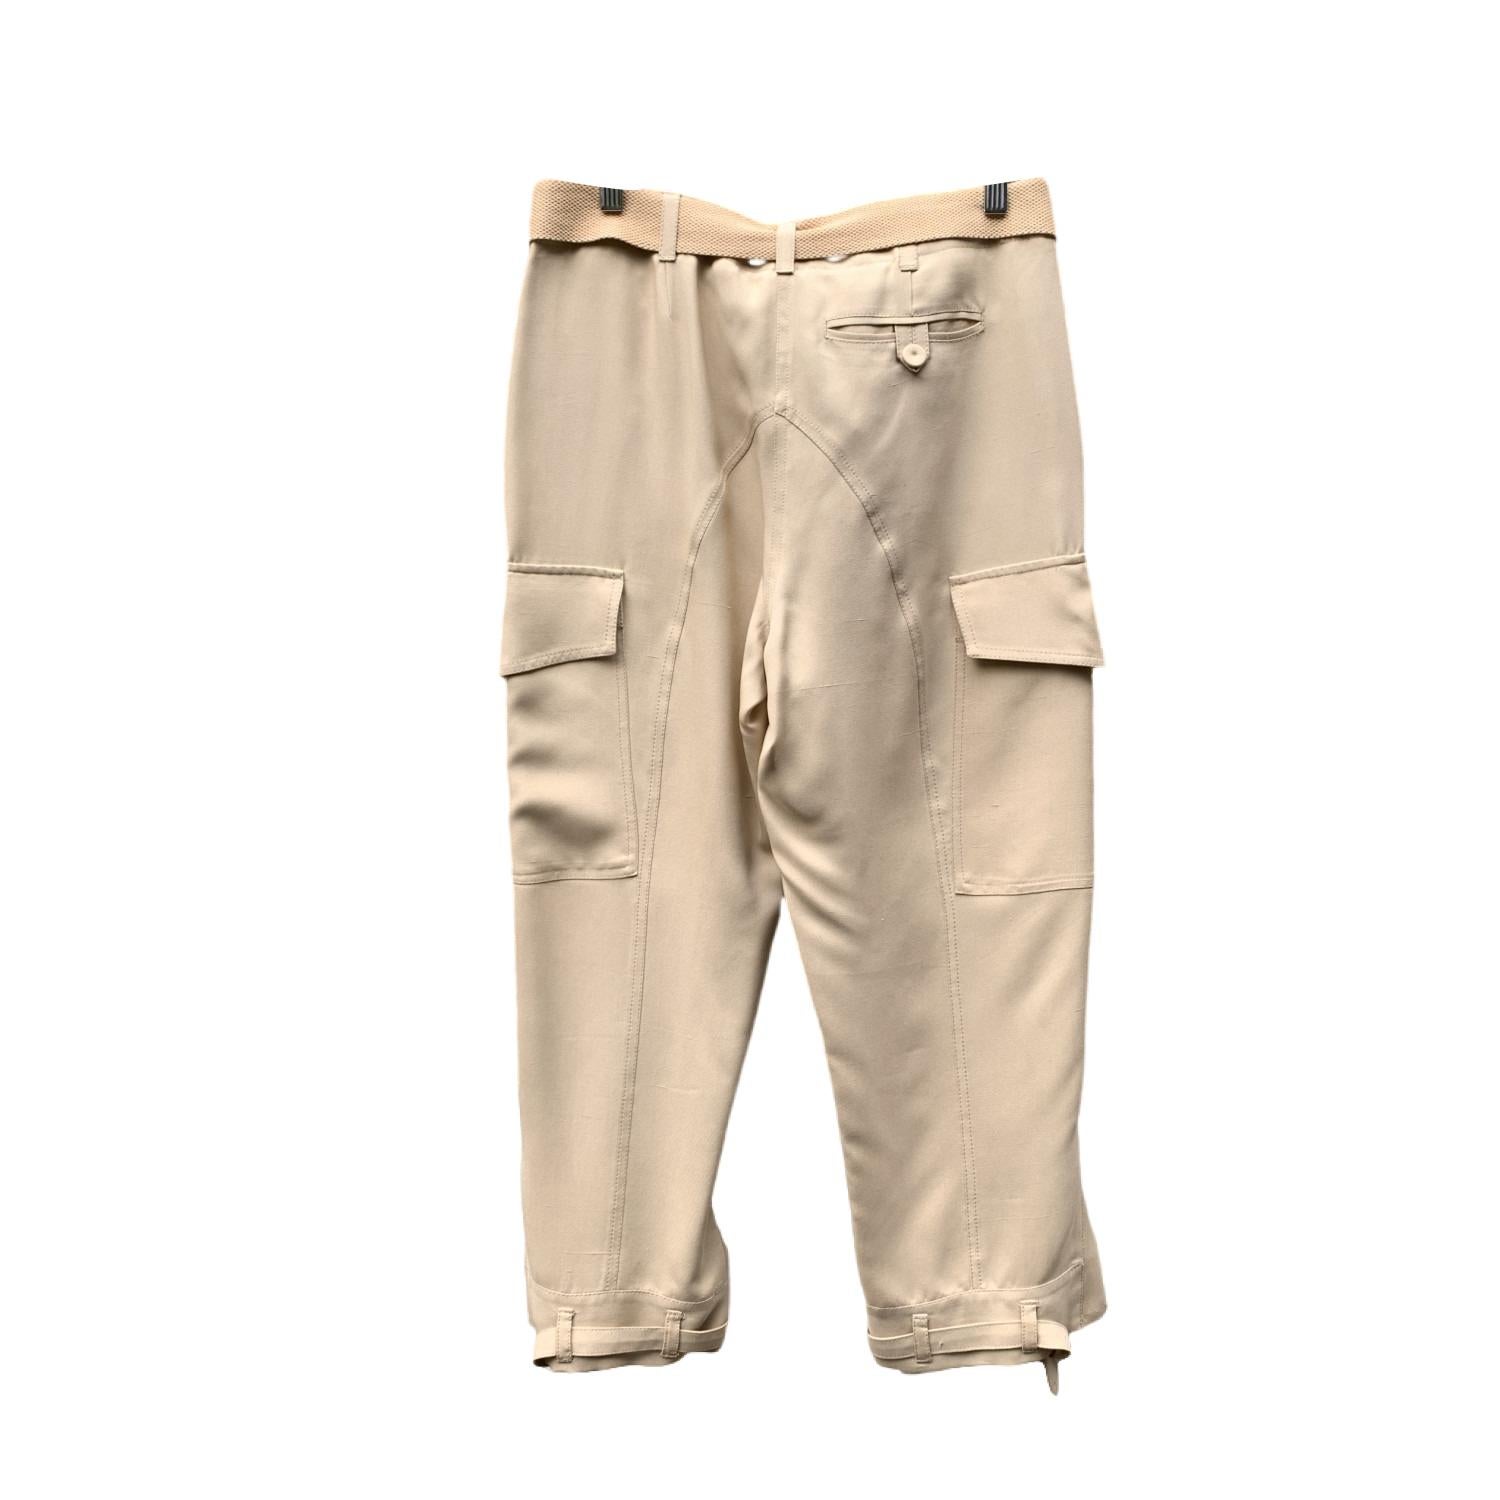 Stella McCartney beige silk cargo pants. It features a belted waistline and front button closure. Composition: 100% silk. Cropped length. Size: 40 IT (it should correspond to a SMALL size)

Details

MATERIAL: Silk

COLOR: Beige

MODEL: -

GENDER: